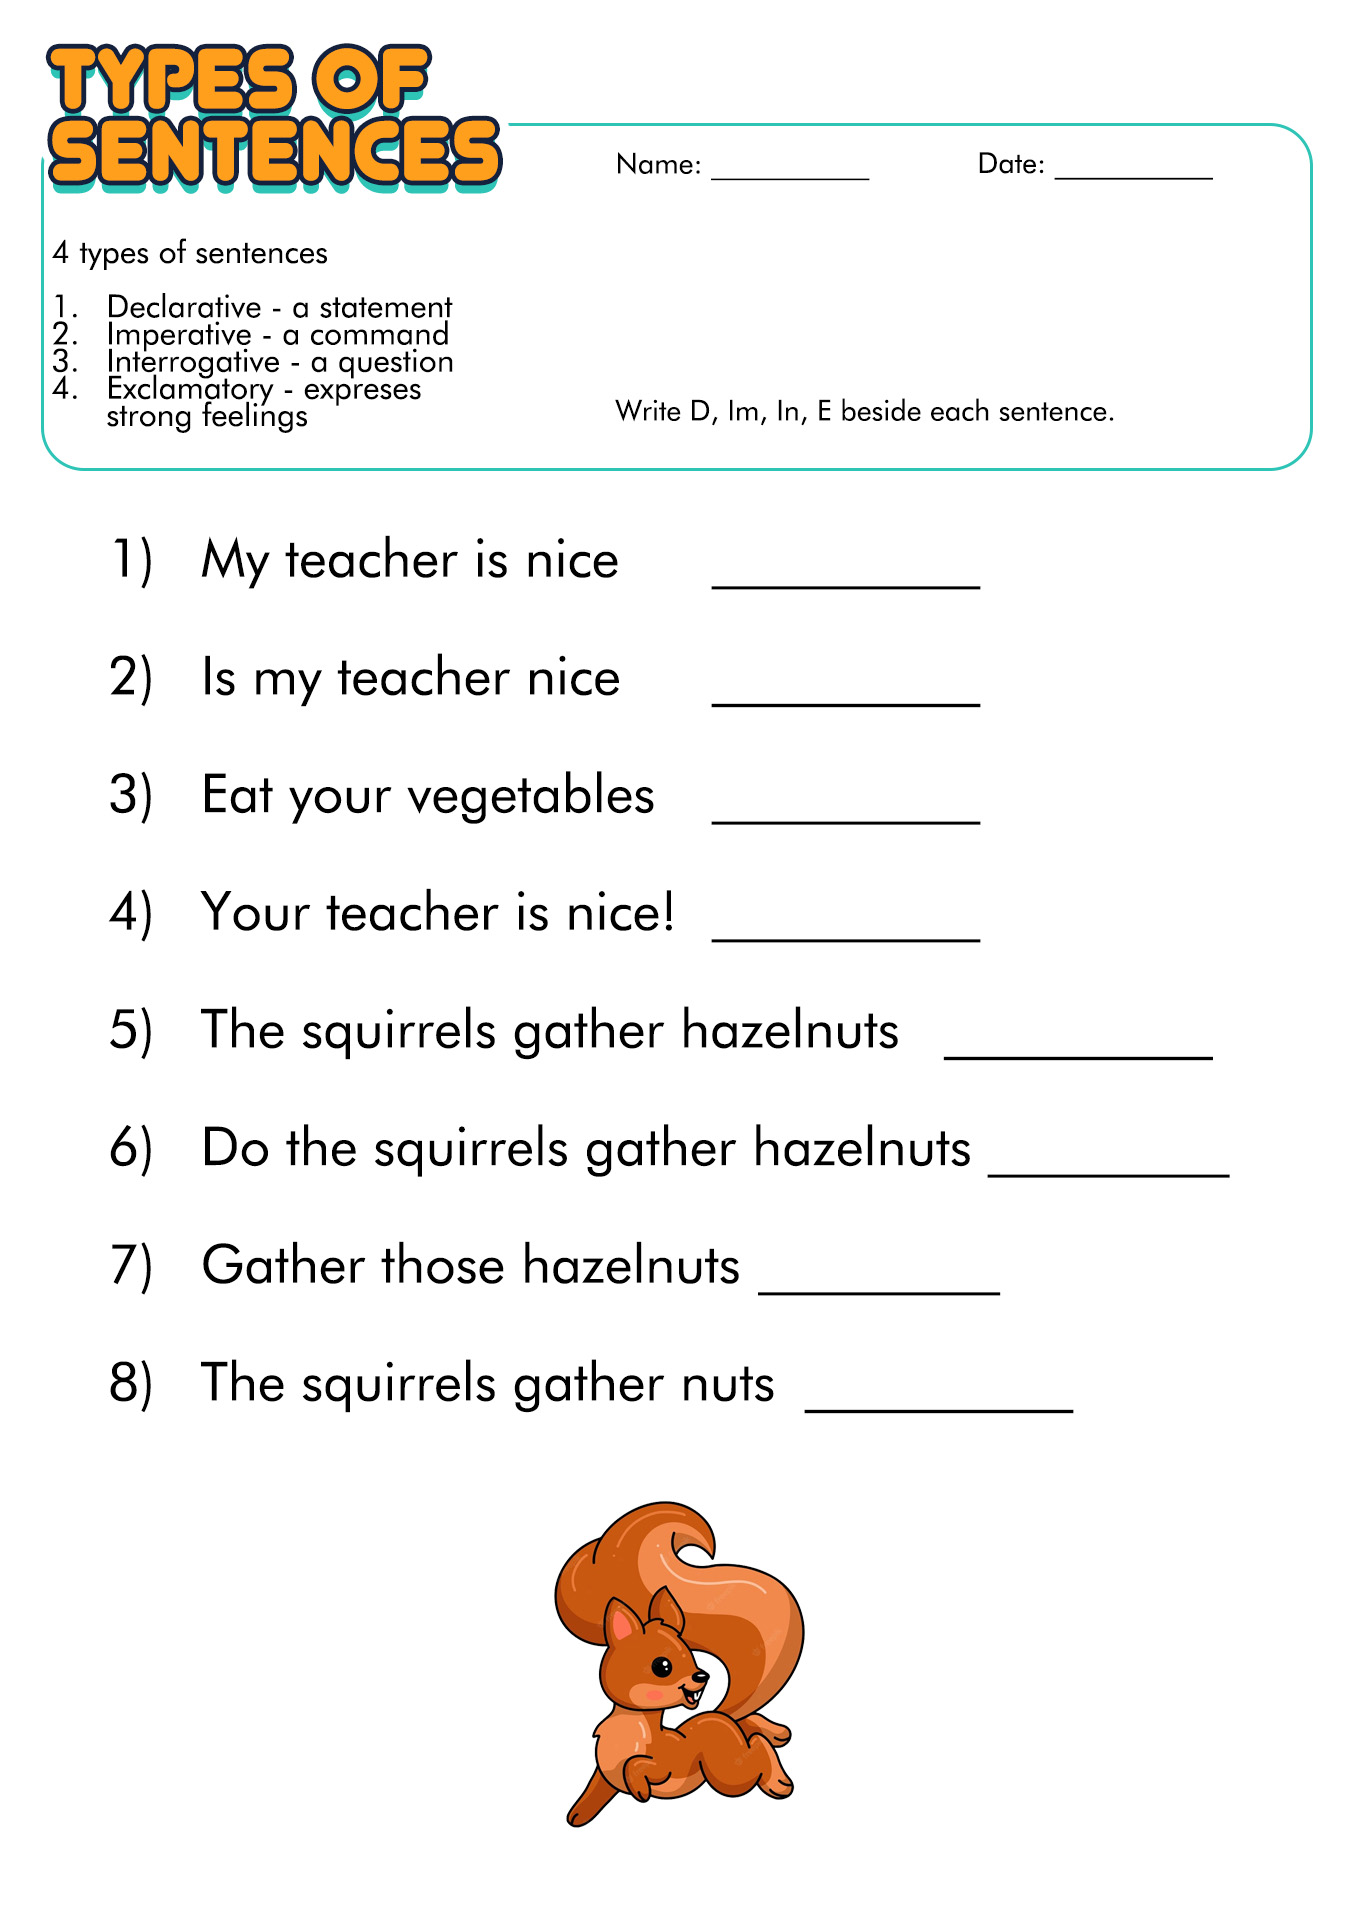 Sentence Types Worksheet With Answers